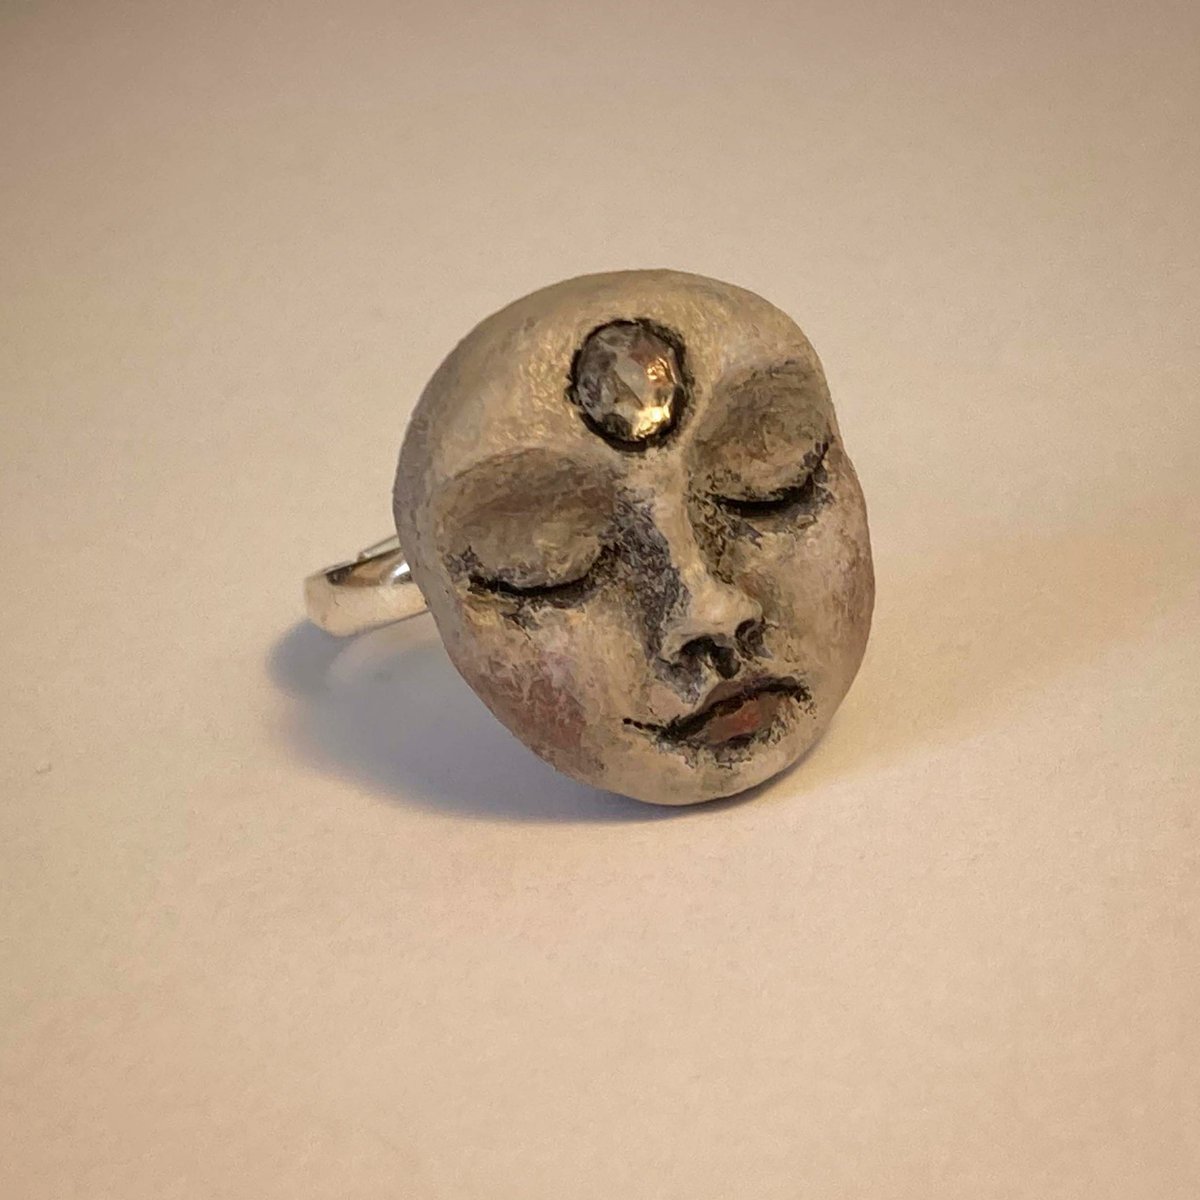 New doll face rings available on my Etsy shop; etsy.com/uk/shop/Poison… #polymerclaysculpture #handsculpted #etsyhandmade #facesculpture #artjewellery #statementring #claysculpture #dollface #artdoll